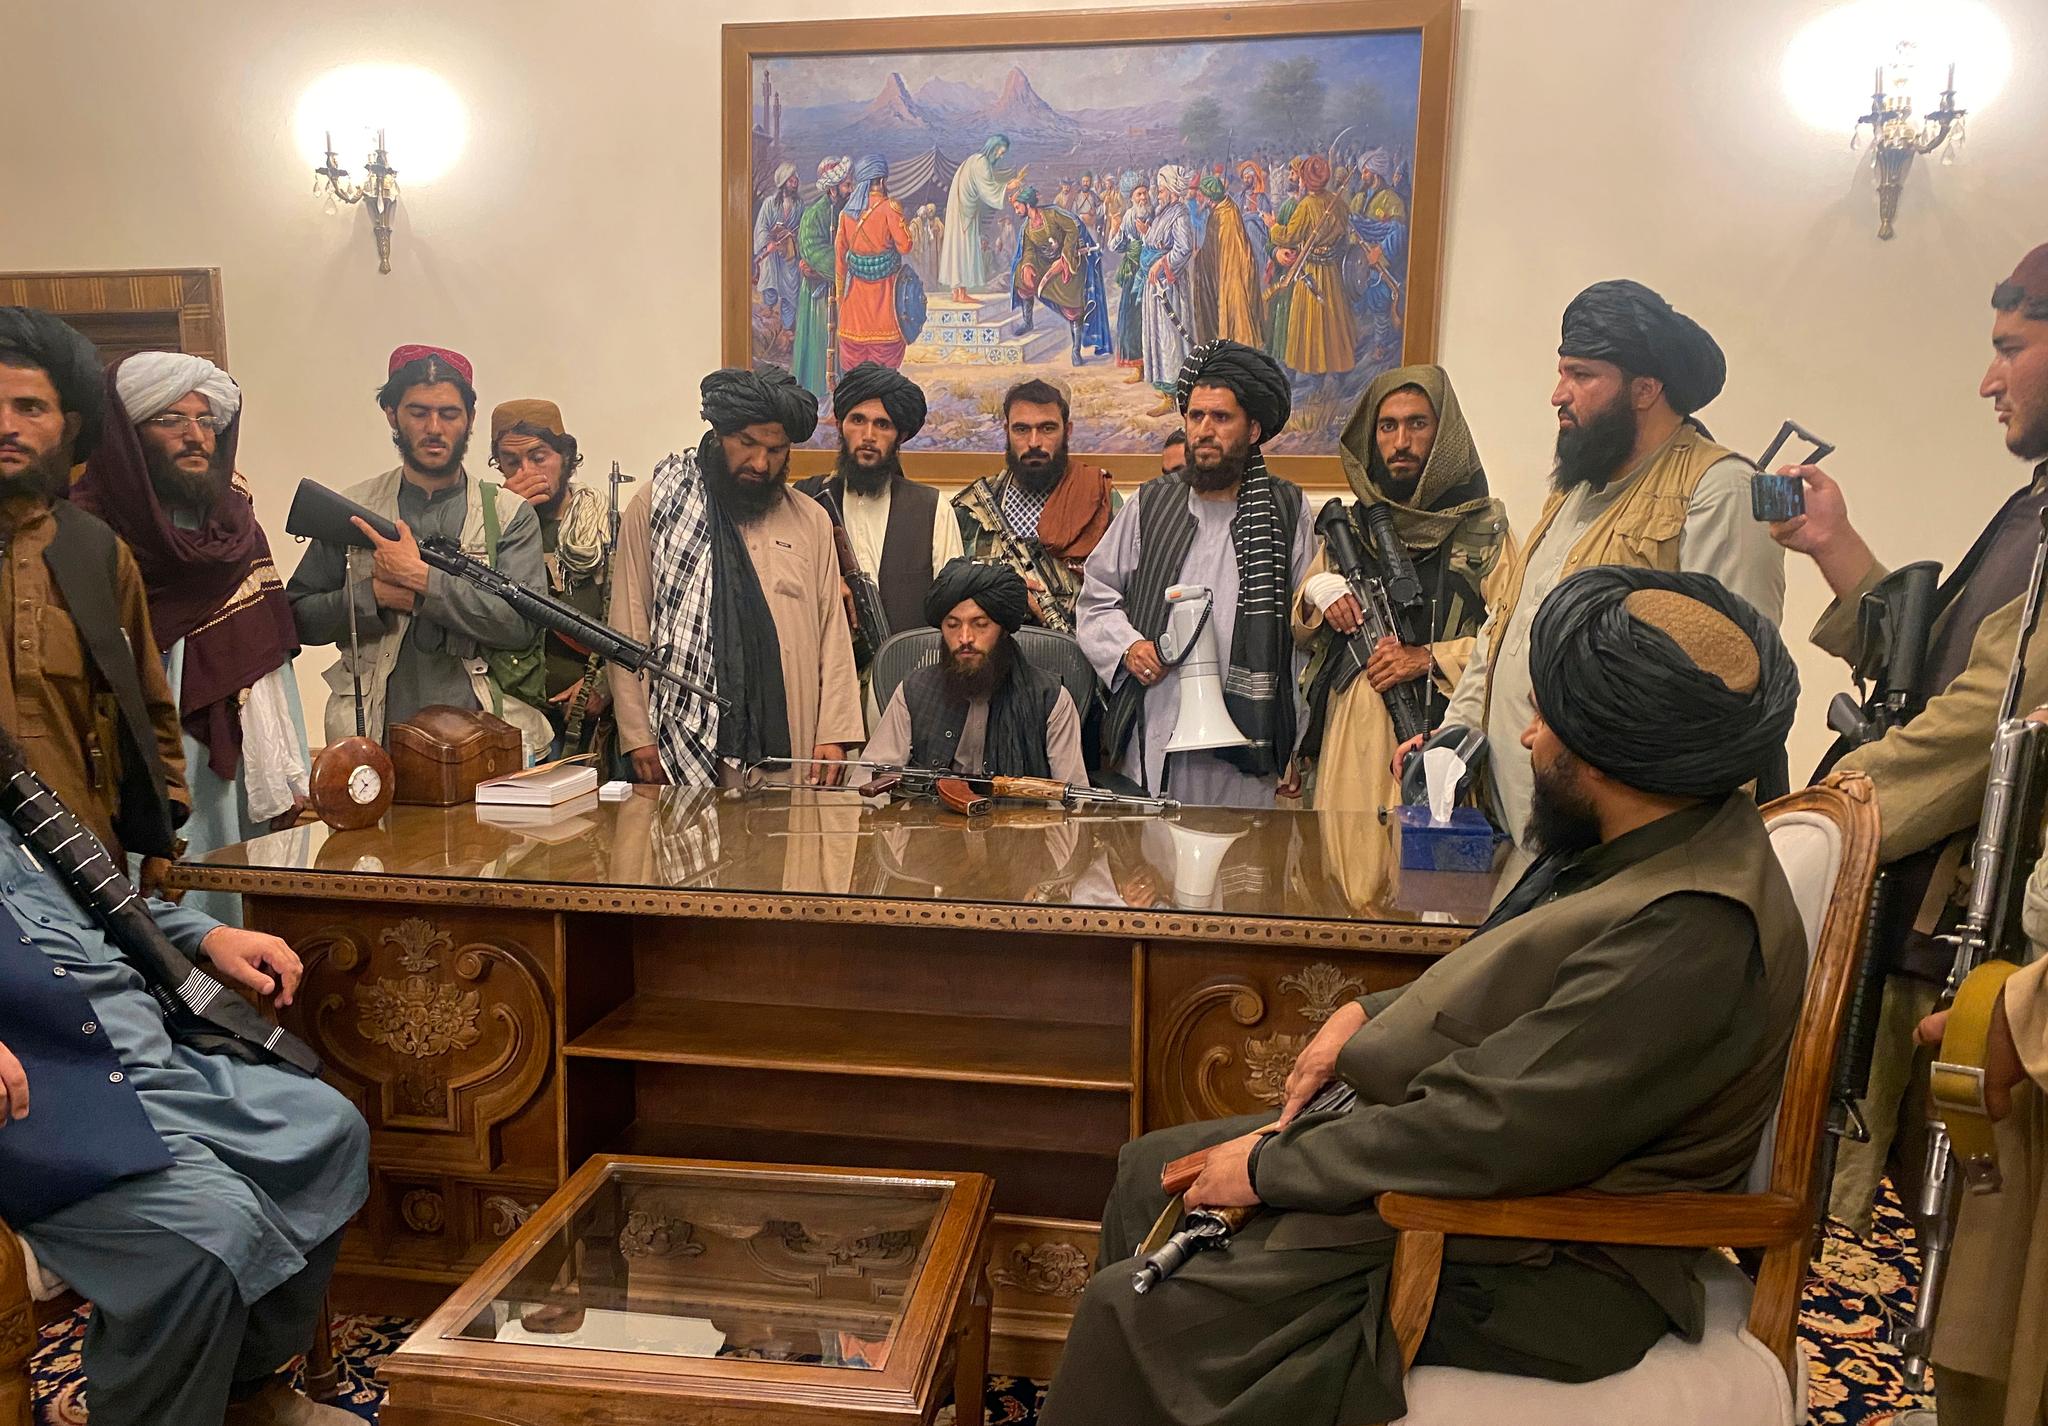 The Taliban arrived in Oslo on Sunday